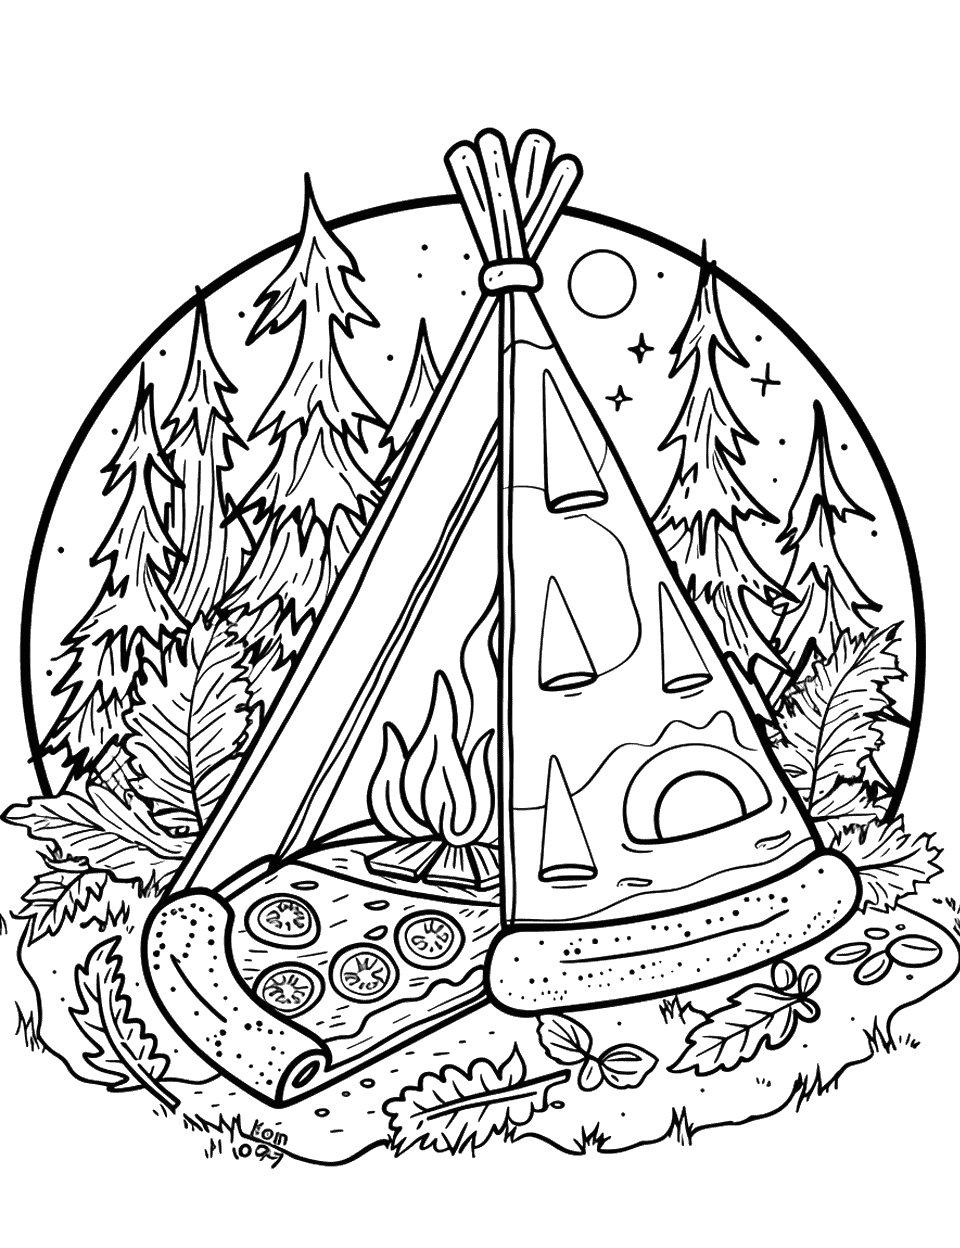 Pizza Slice Camping Coloring Page - A family camping scene with a tent shaped like a pizza slice and a campfire.